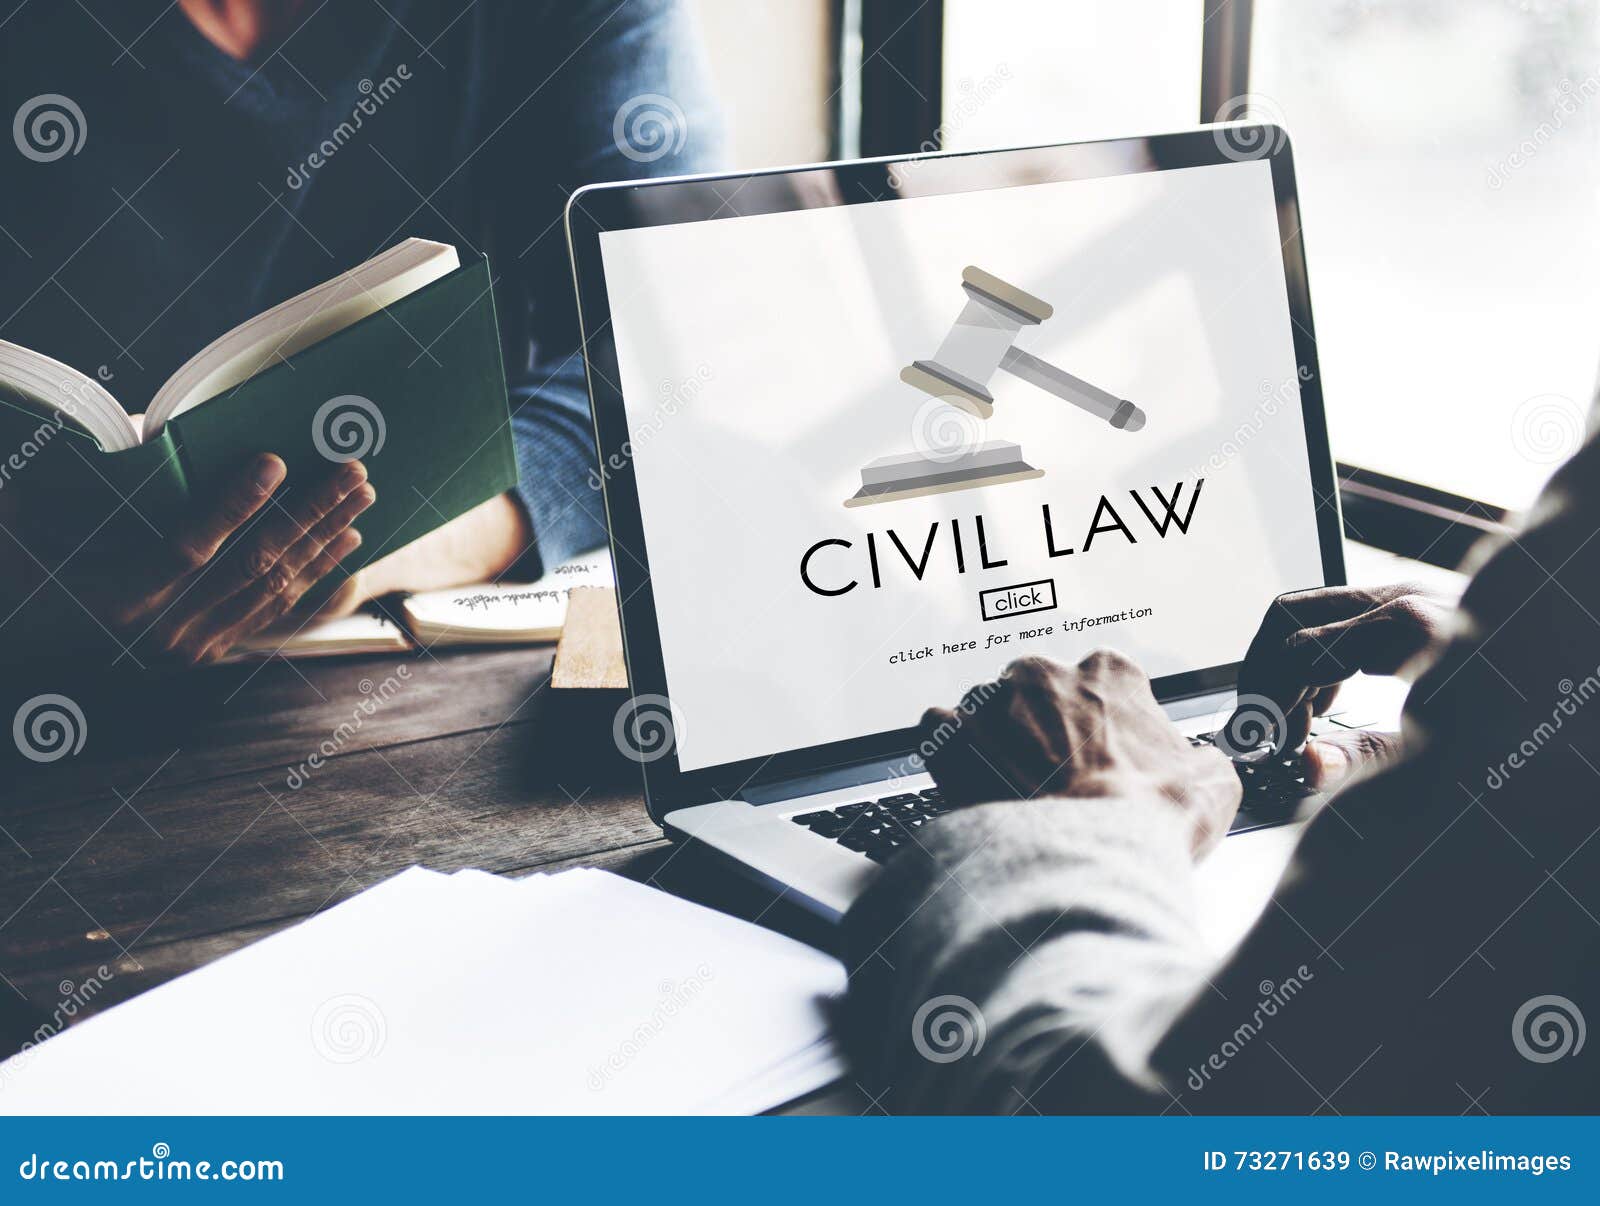 civil law common justice legal regulation rights concept